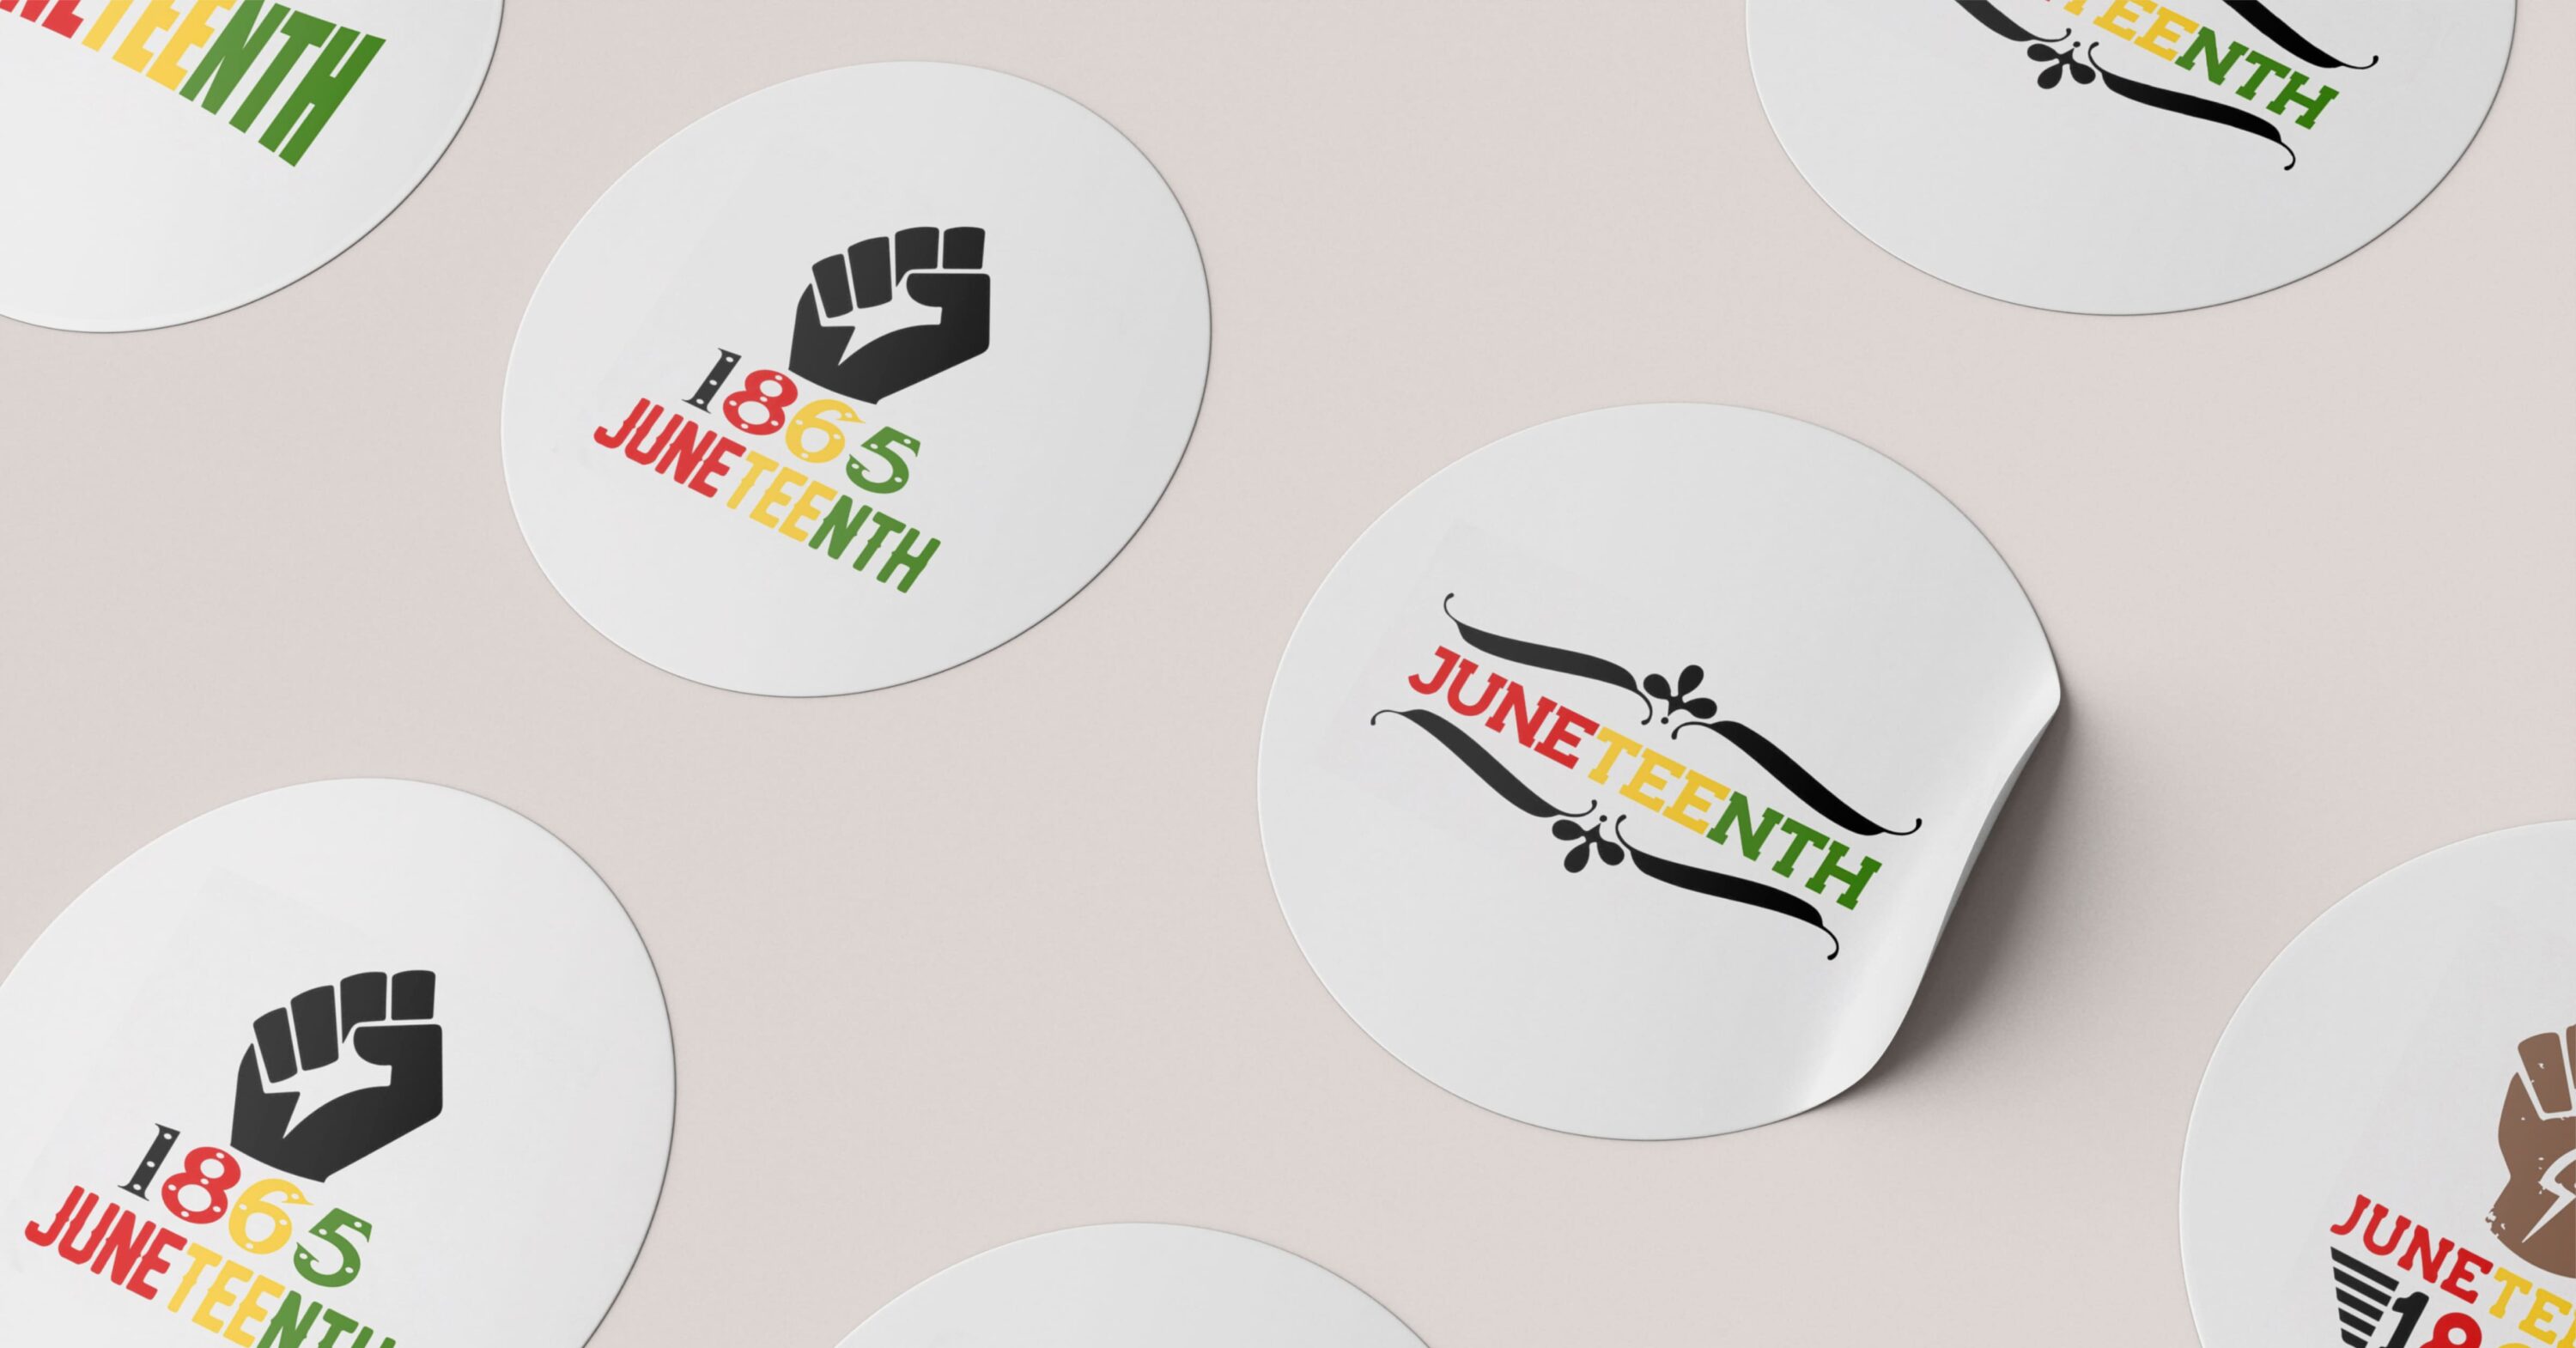 Juneteenth themed stickers.